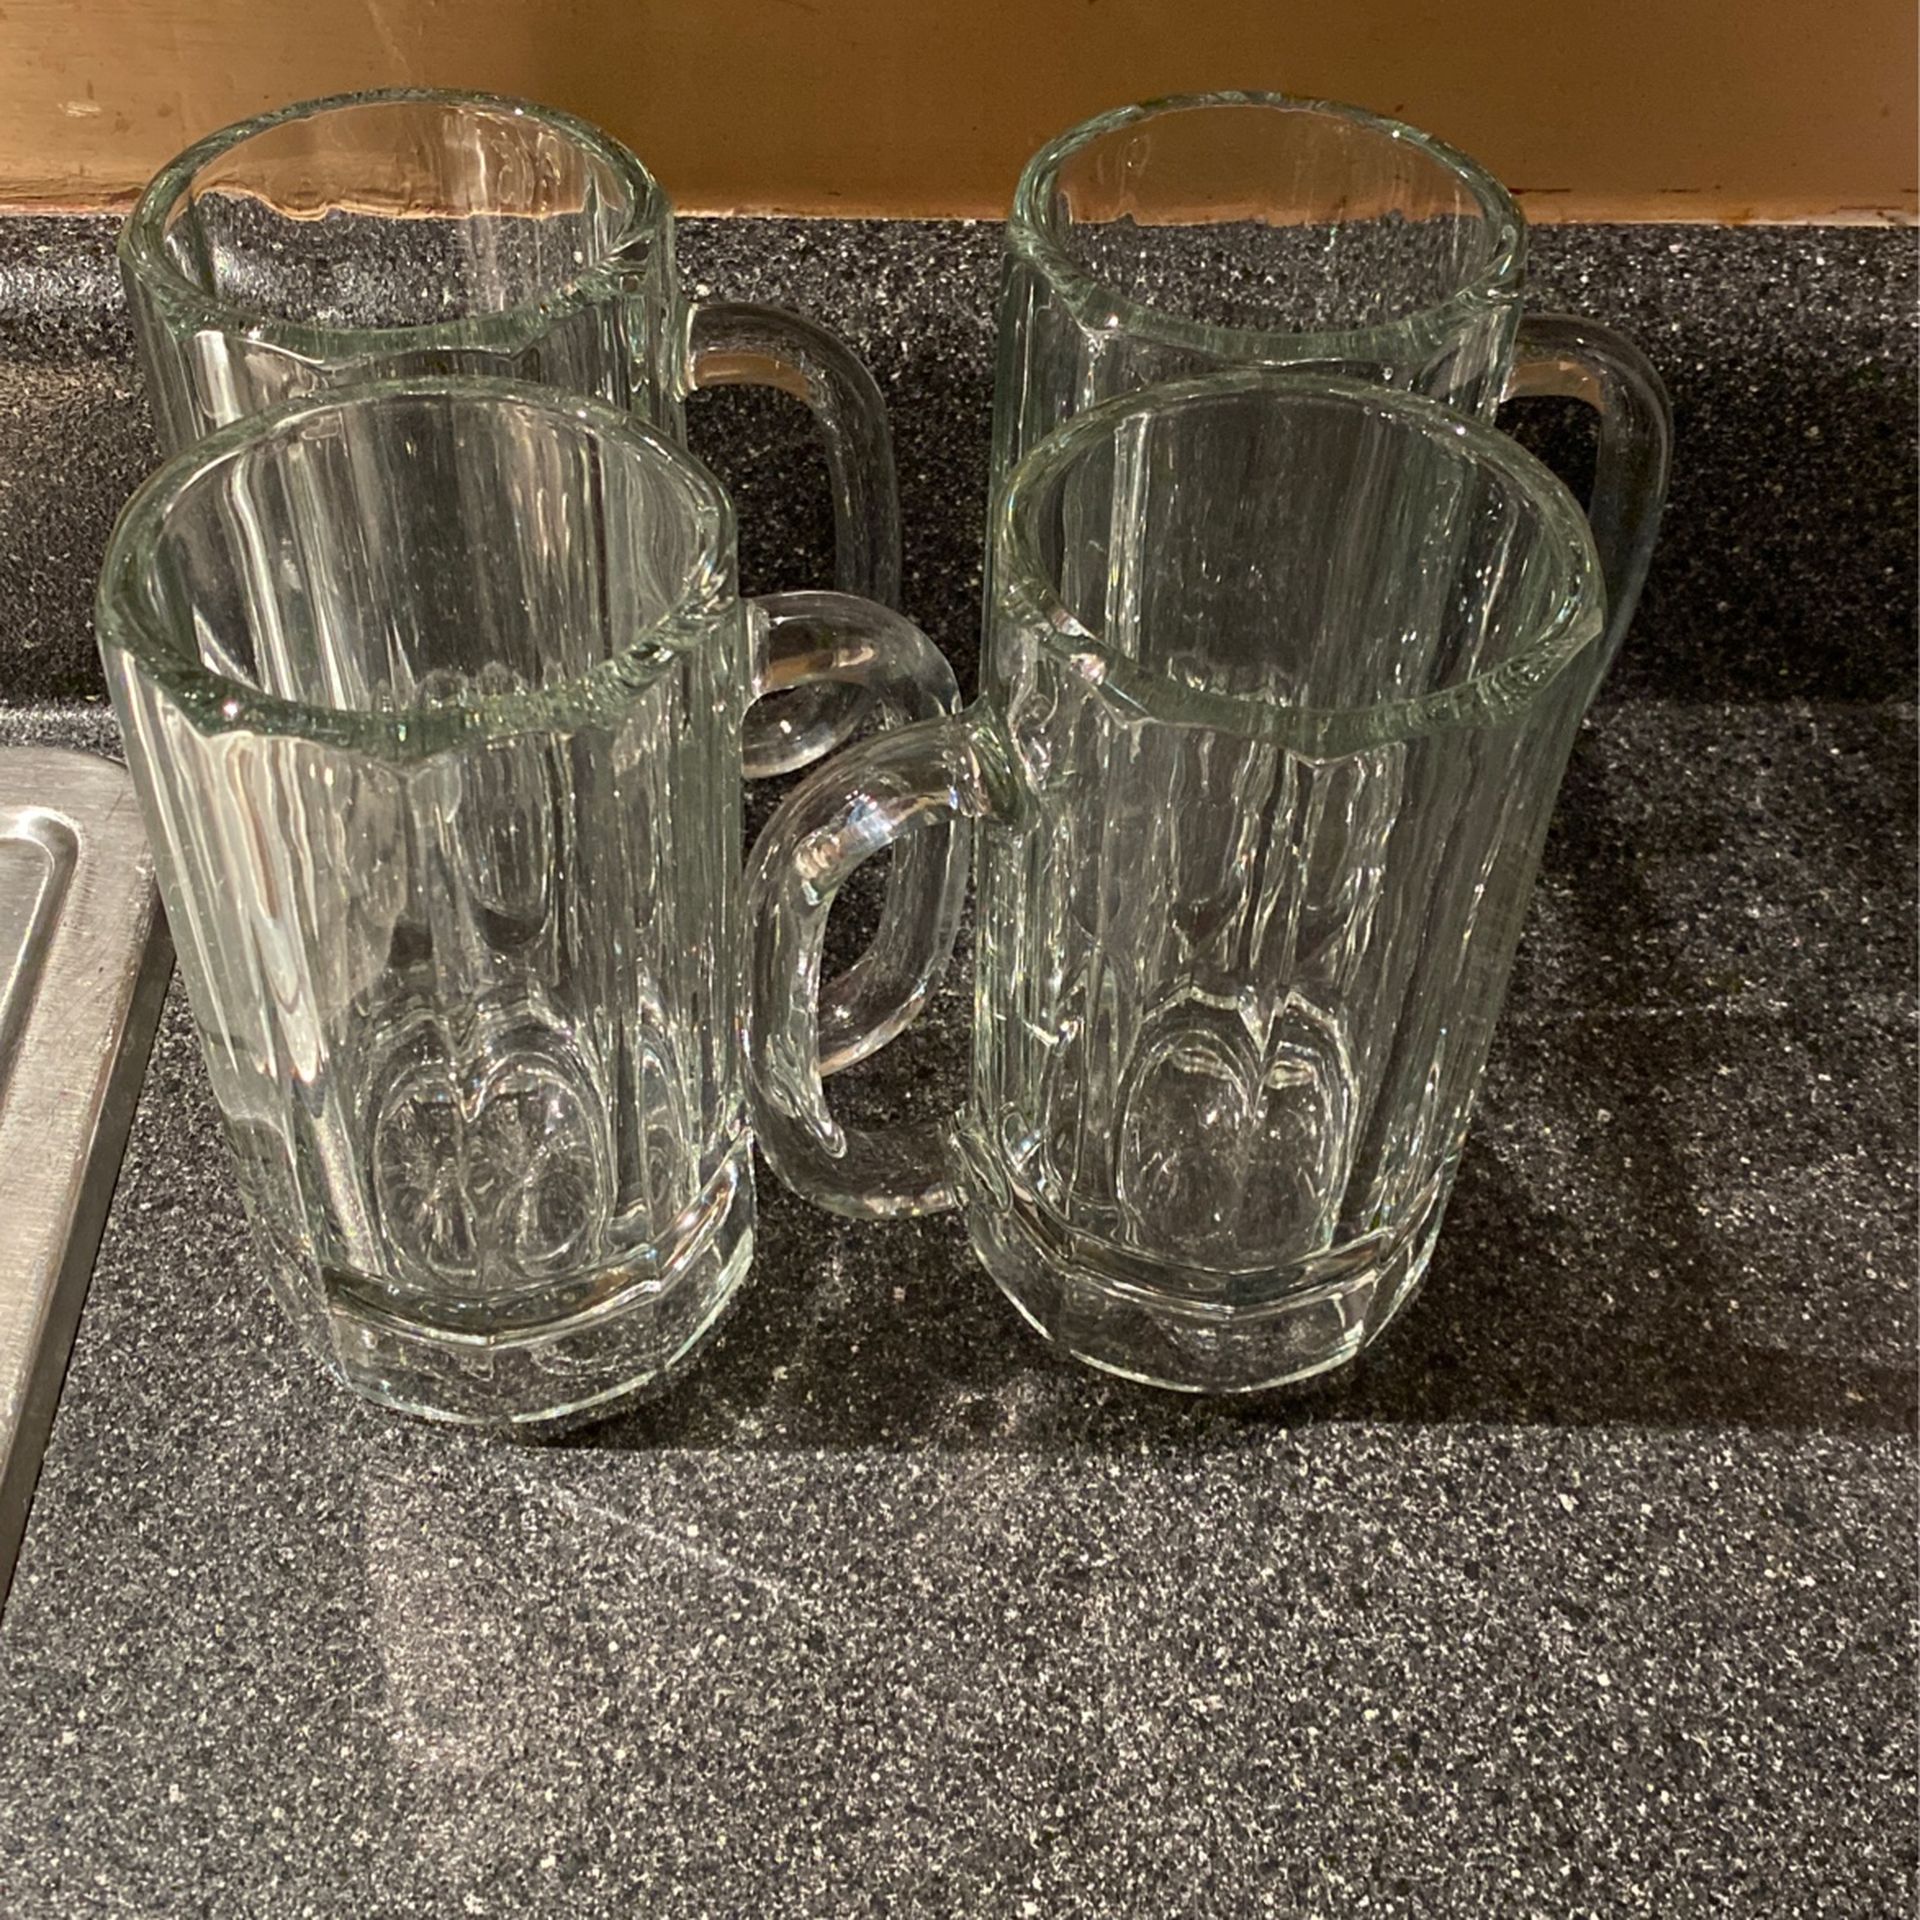 4 Beer Mug brand New. 4$ for all very thick glass.